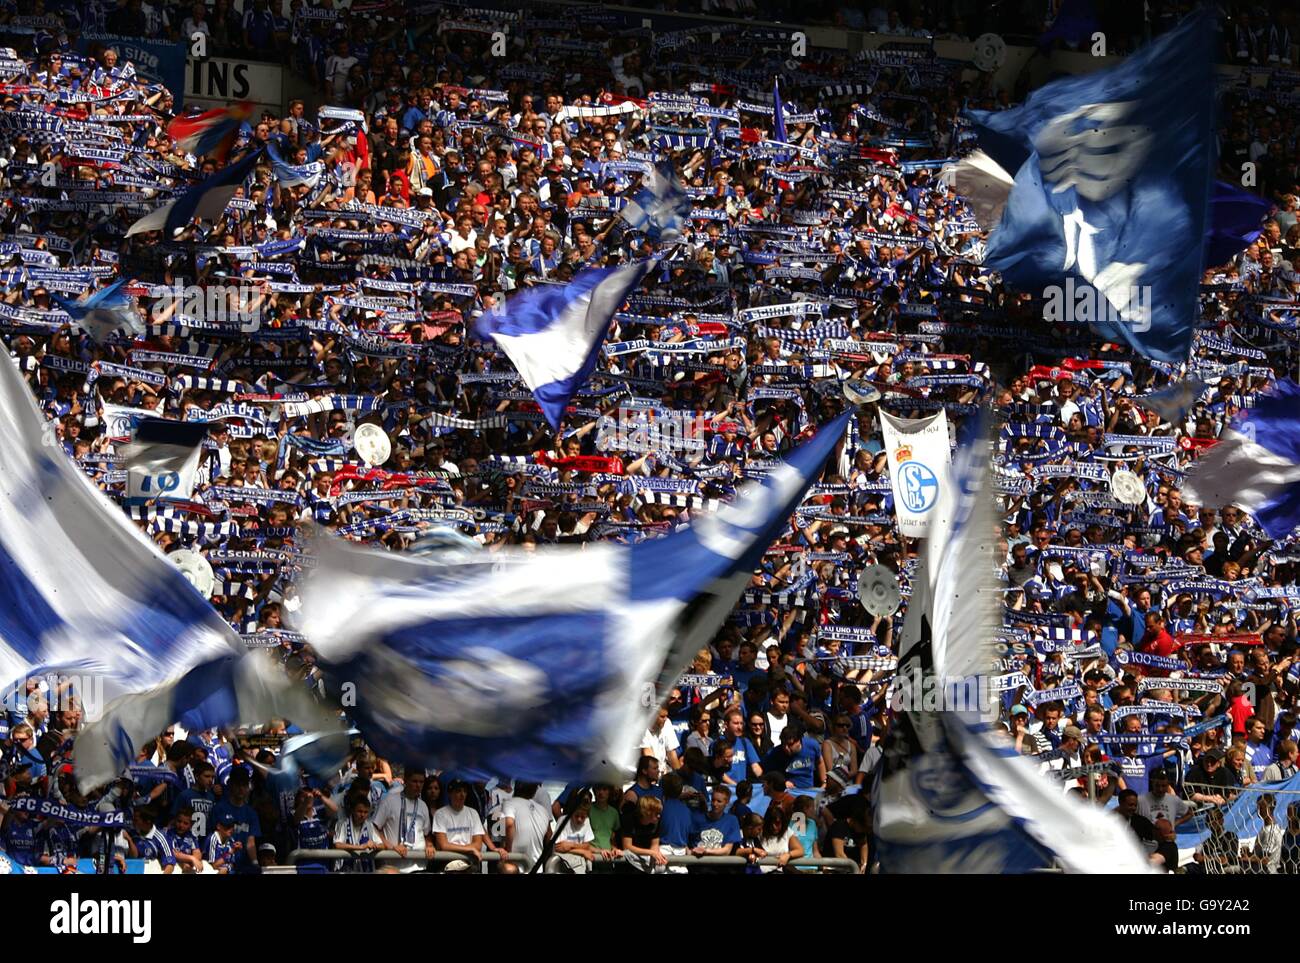 Schalke 04 supporters, in the stands during the match. Stock Photo